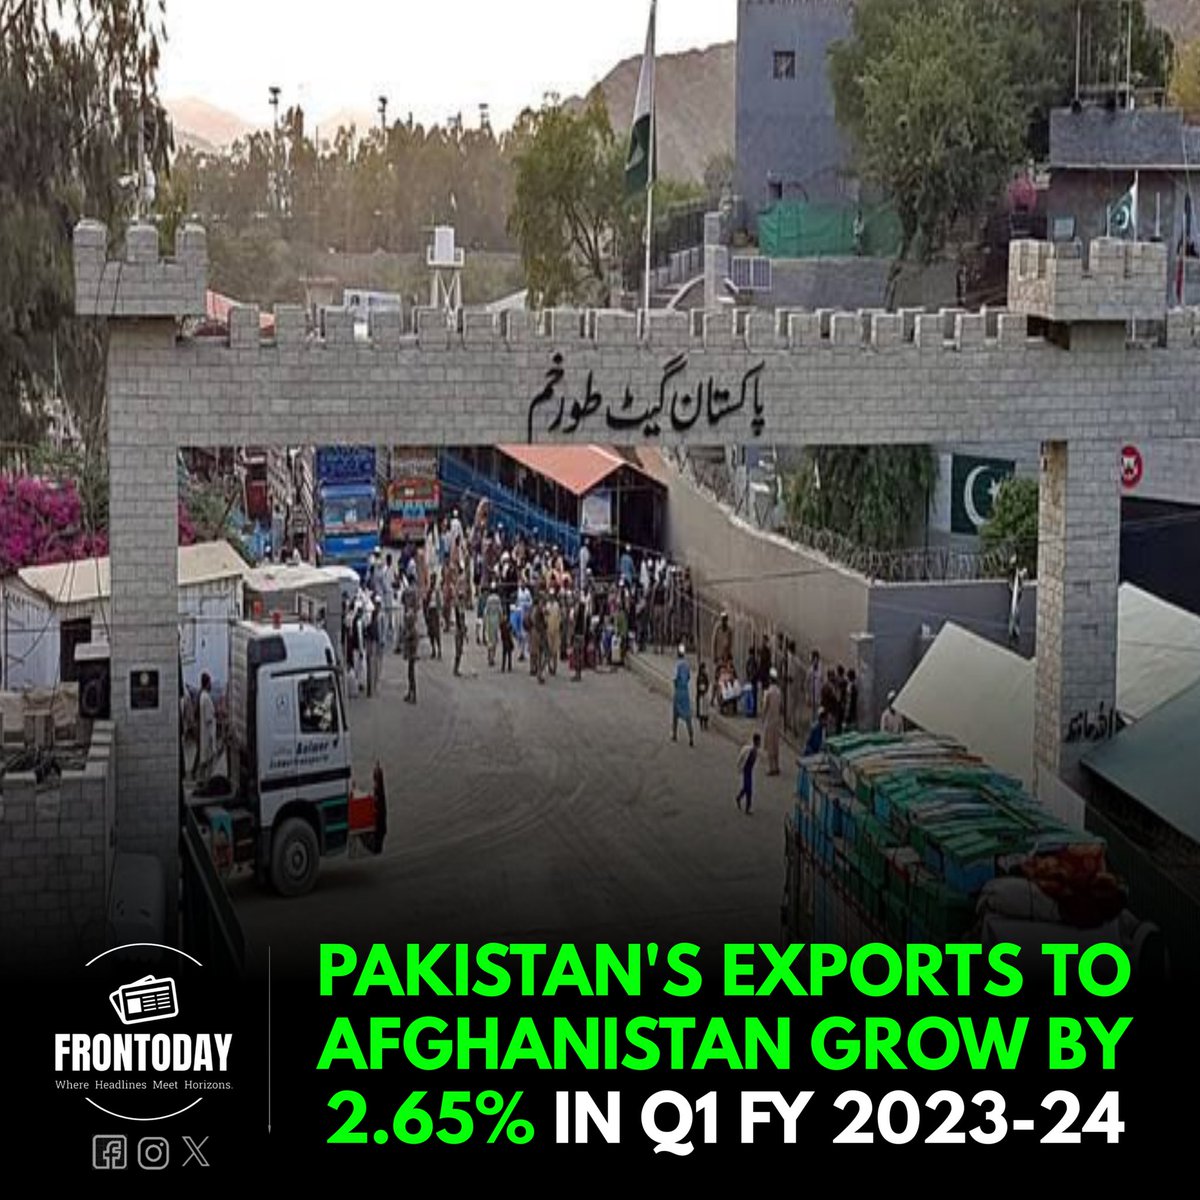 Positive trade news! Pakistan's exports to Afghanistan show a robust growth of 2.65% in the first four months of FY 2023-24, reaching $180.686 million. A promising start to the fiscal year! #PakistanExports #TradeRelations #EconomicGrowth #FY2023_24 #TradeUpdate